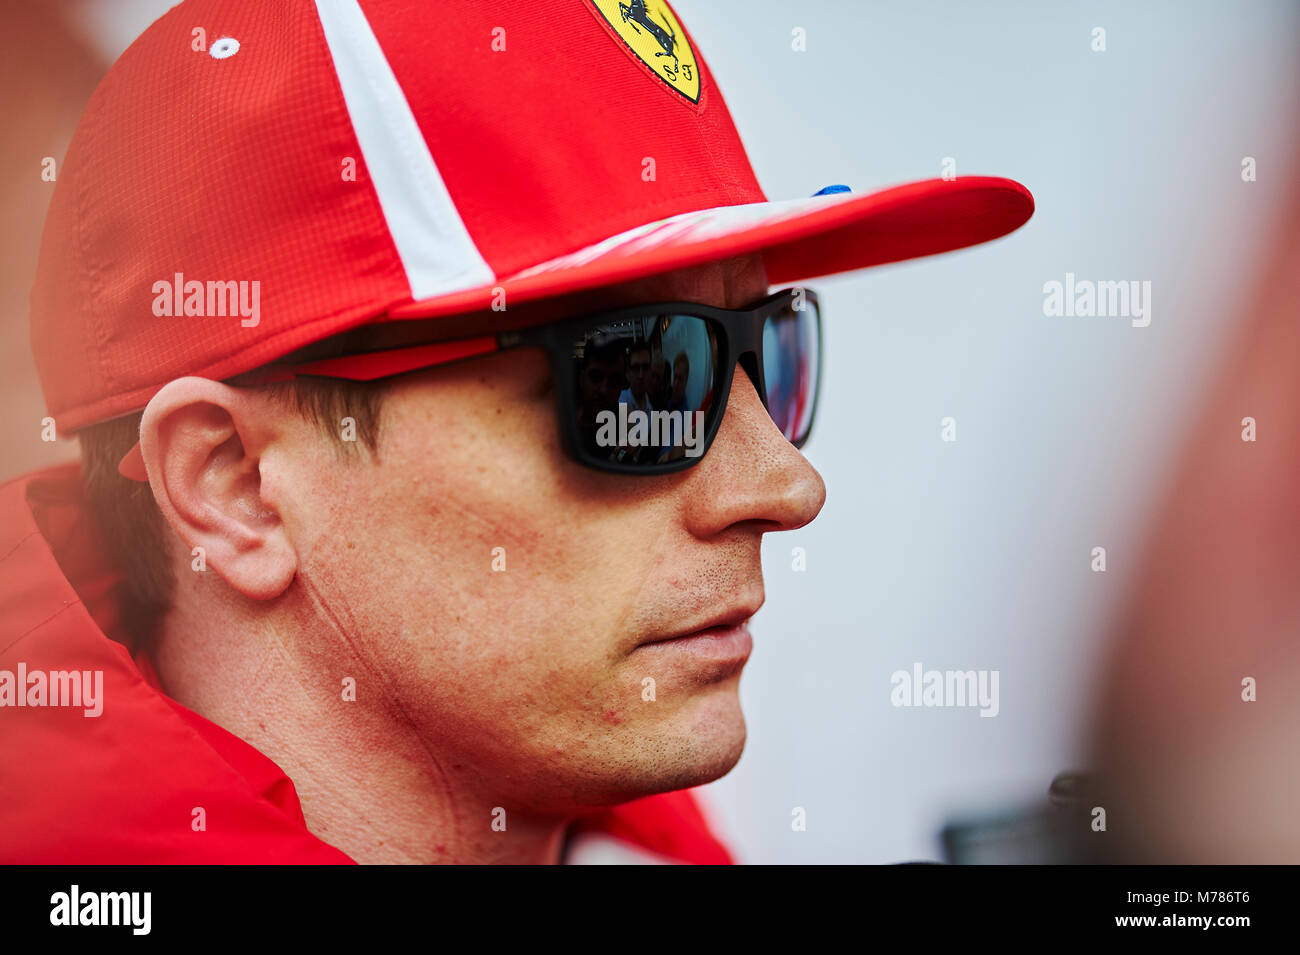 Barcelona, Spain. 9th Mar, 2018. Kimi Raikkonen of the Ferrari Team offers a press conference after make the best lap time during the pre season Formula One test. Credit: Pablo Guillen/Alamy Live News Stock Photo